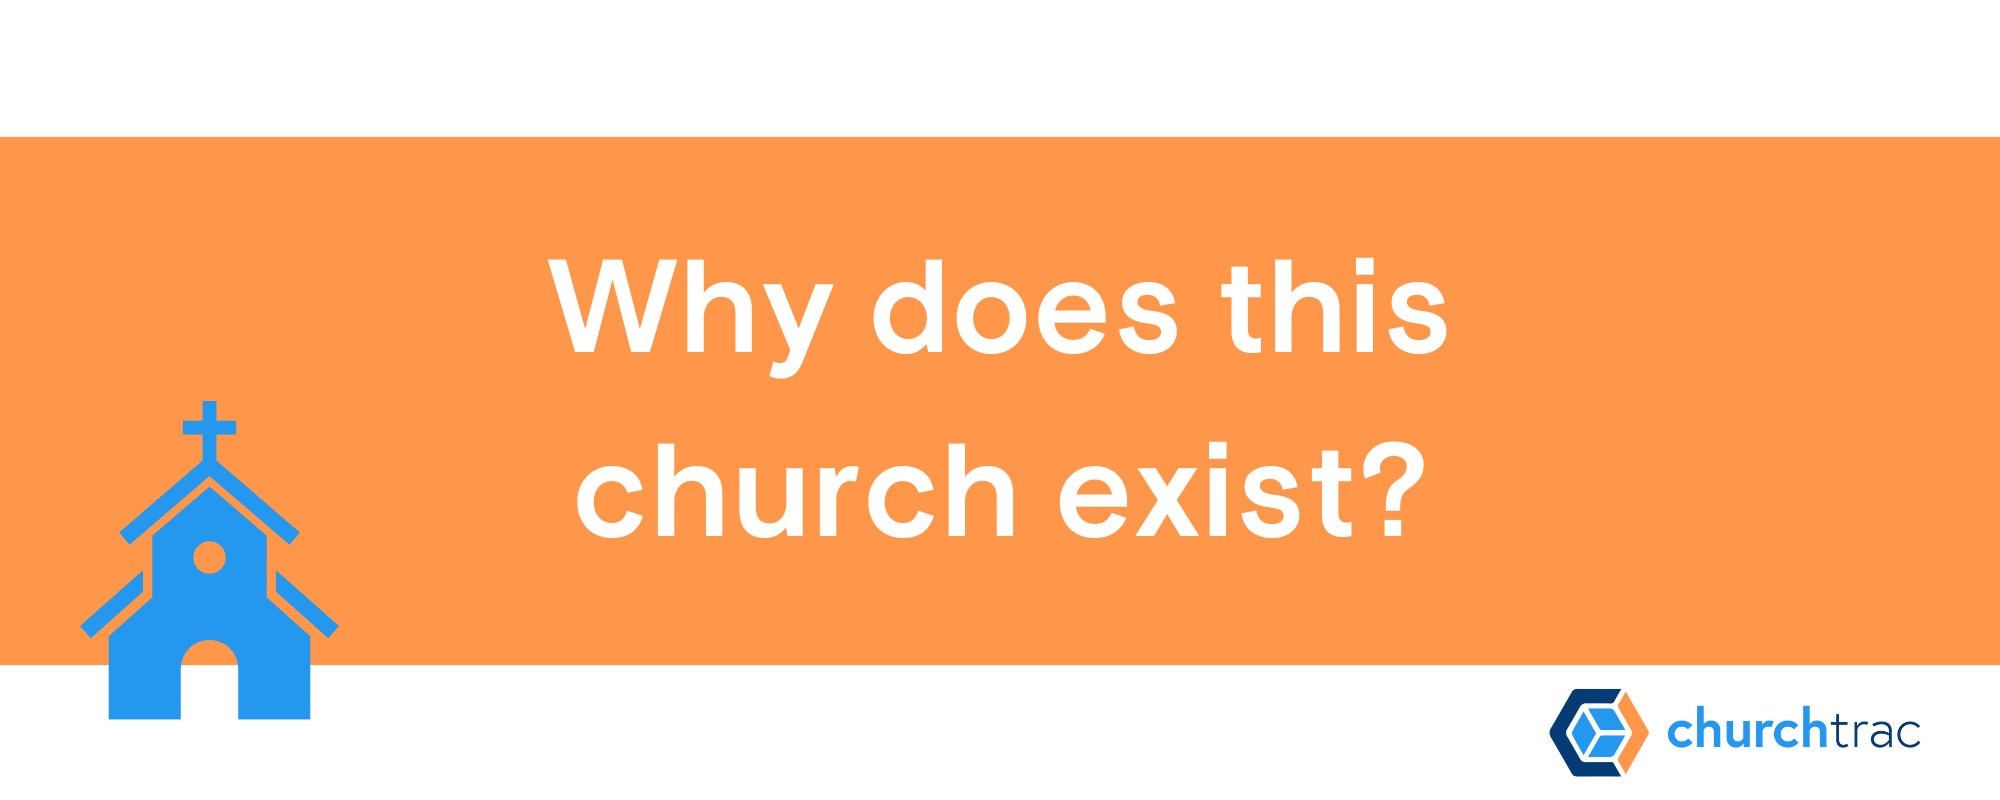 Why does this church exist? The answer to that question is your church's vision statement.